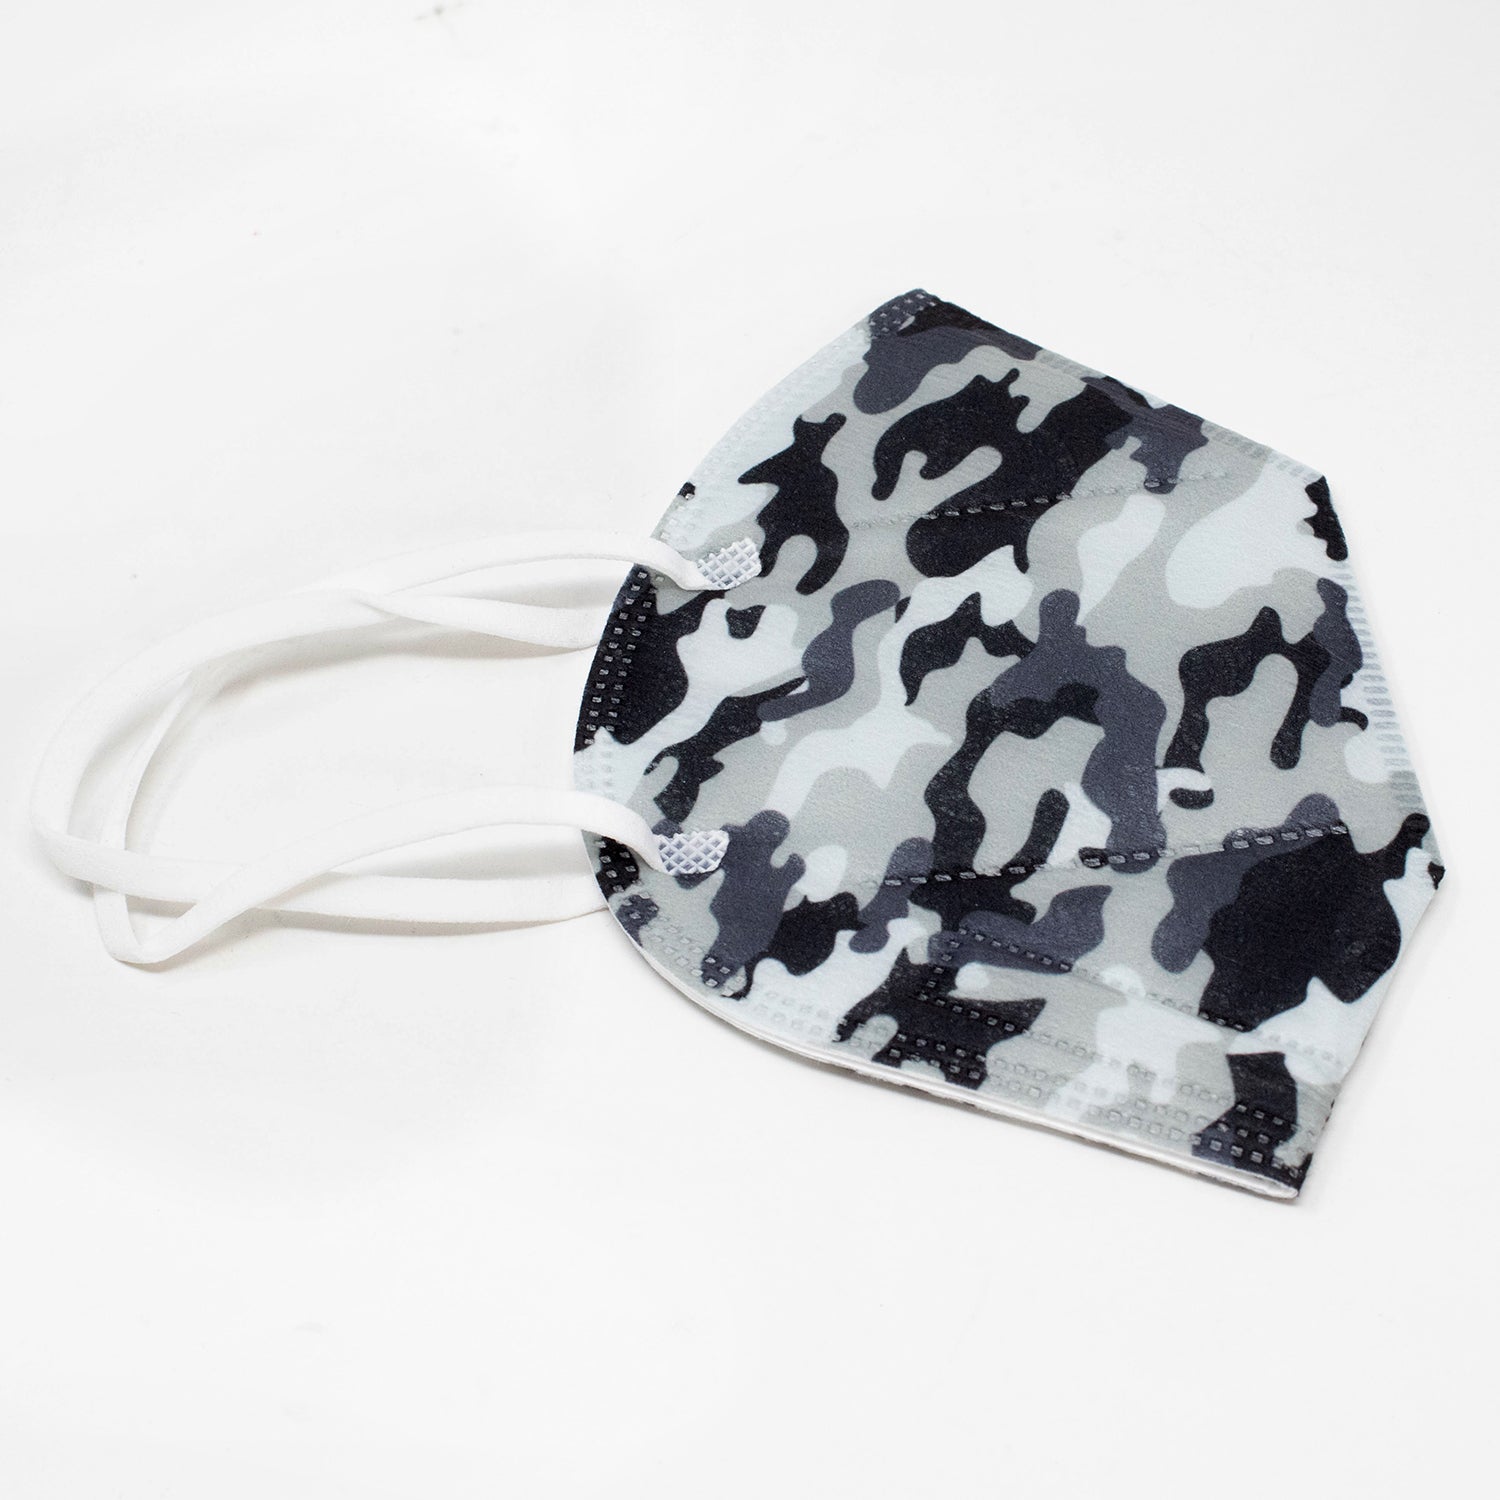 Safe KN95 mask with gray camouflage pattern and white stripes. Reusable mask, strong elastic straps. 